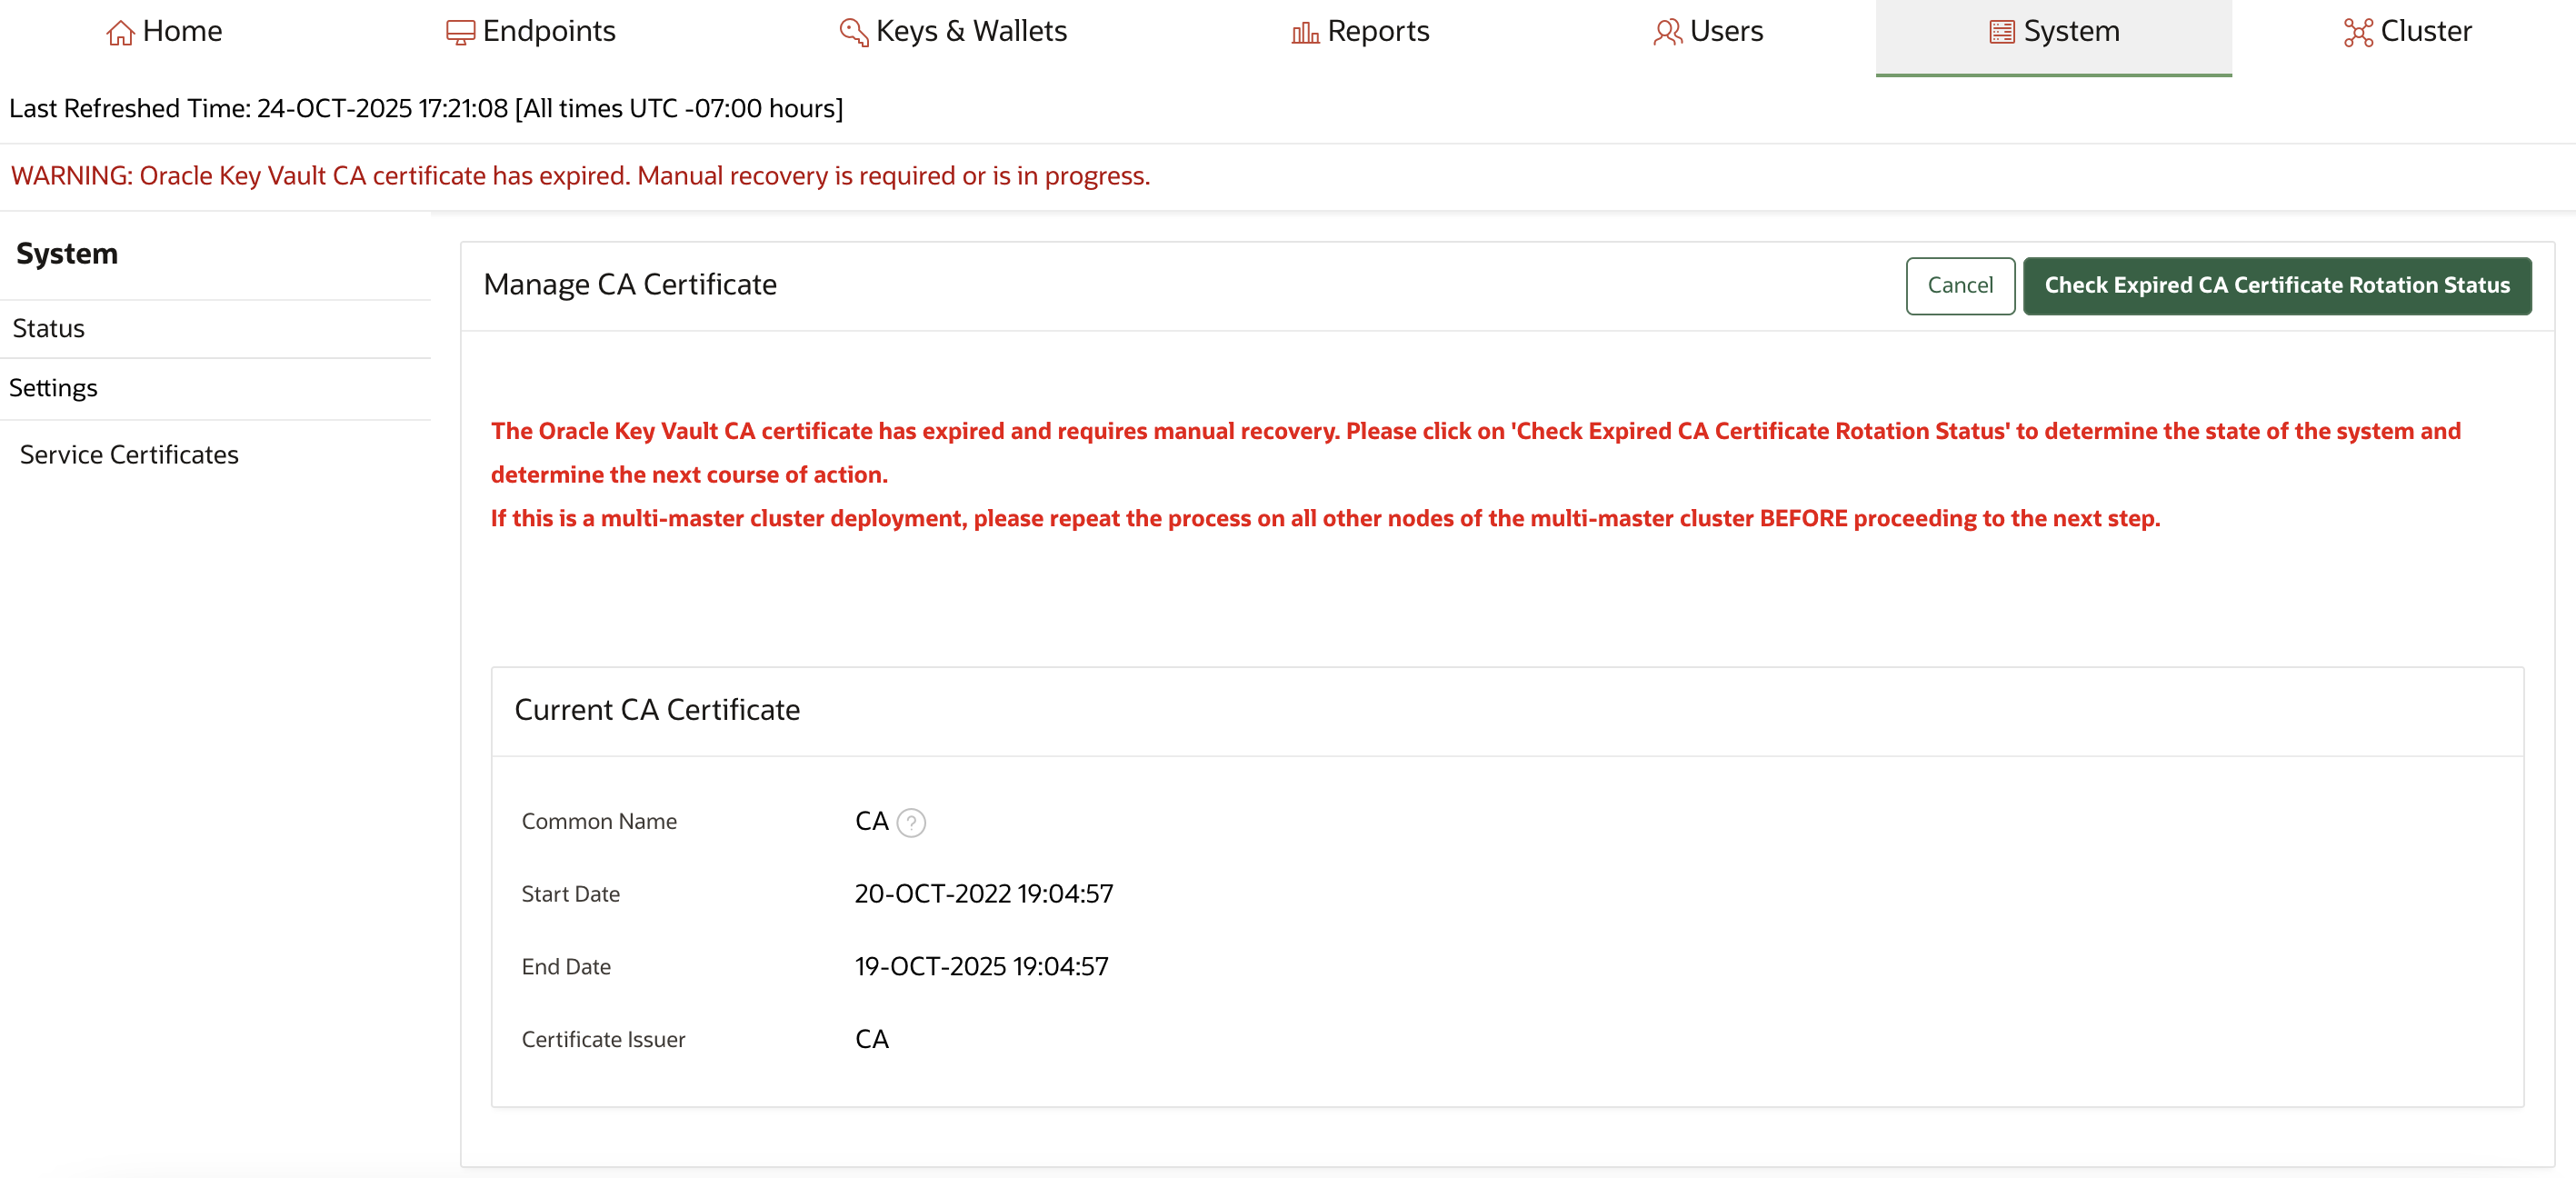 Description of 21.5_check_expired_ca_certificate_rotation_status.png follows